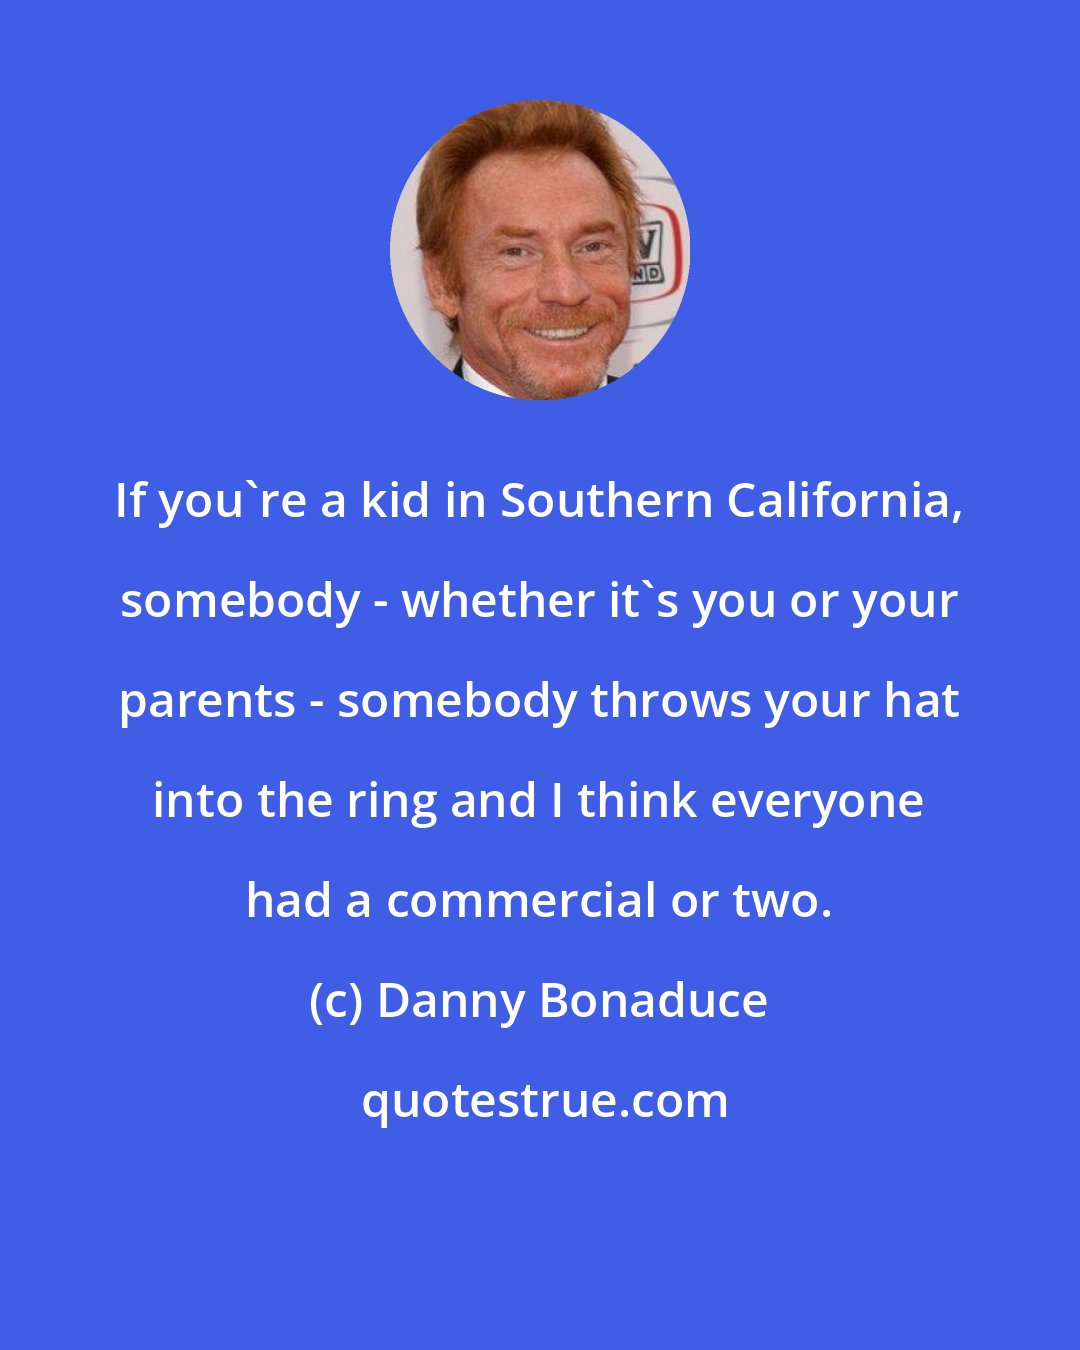 Danny Bonaduce: If you're a kid in Southern California, somebody - whether it's you or your parents - somebody throws your hat into the ring and I think everyone had a commercial or two.